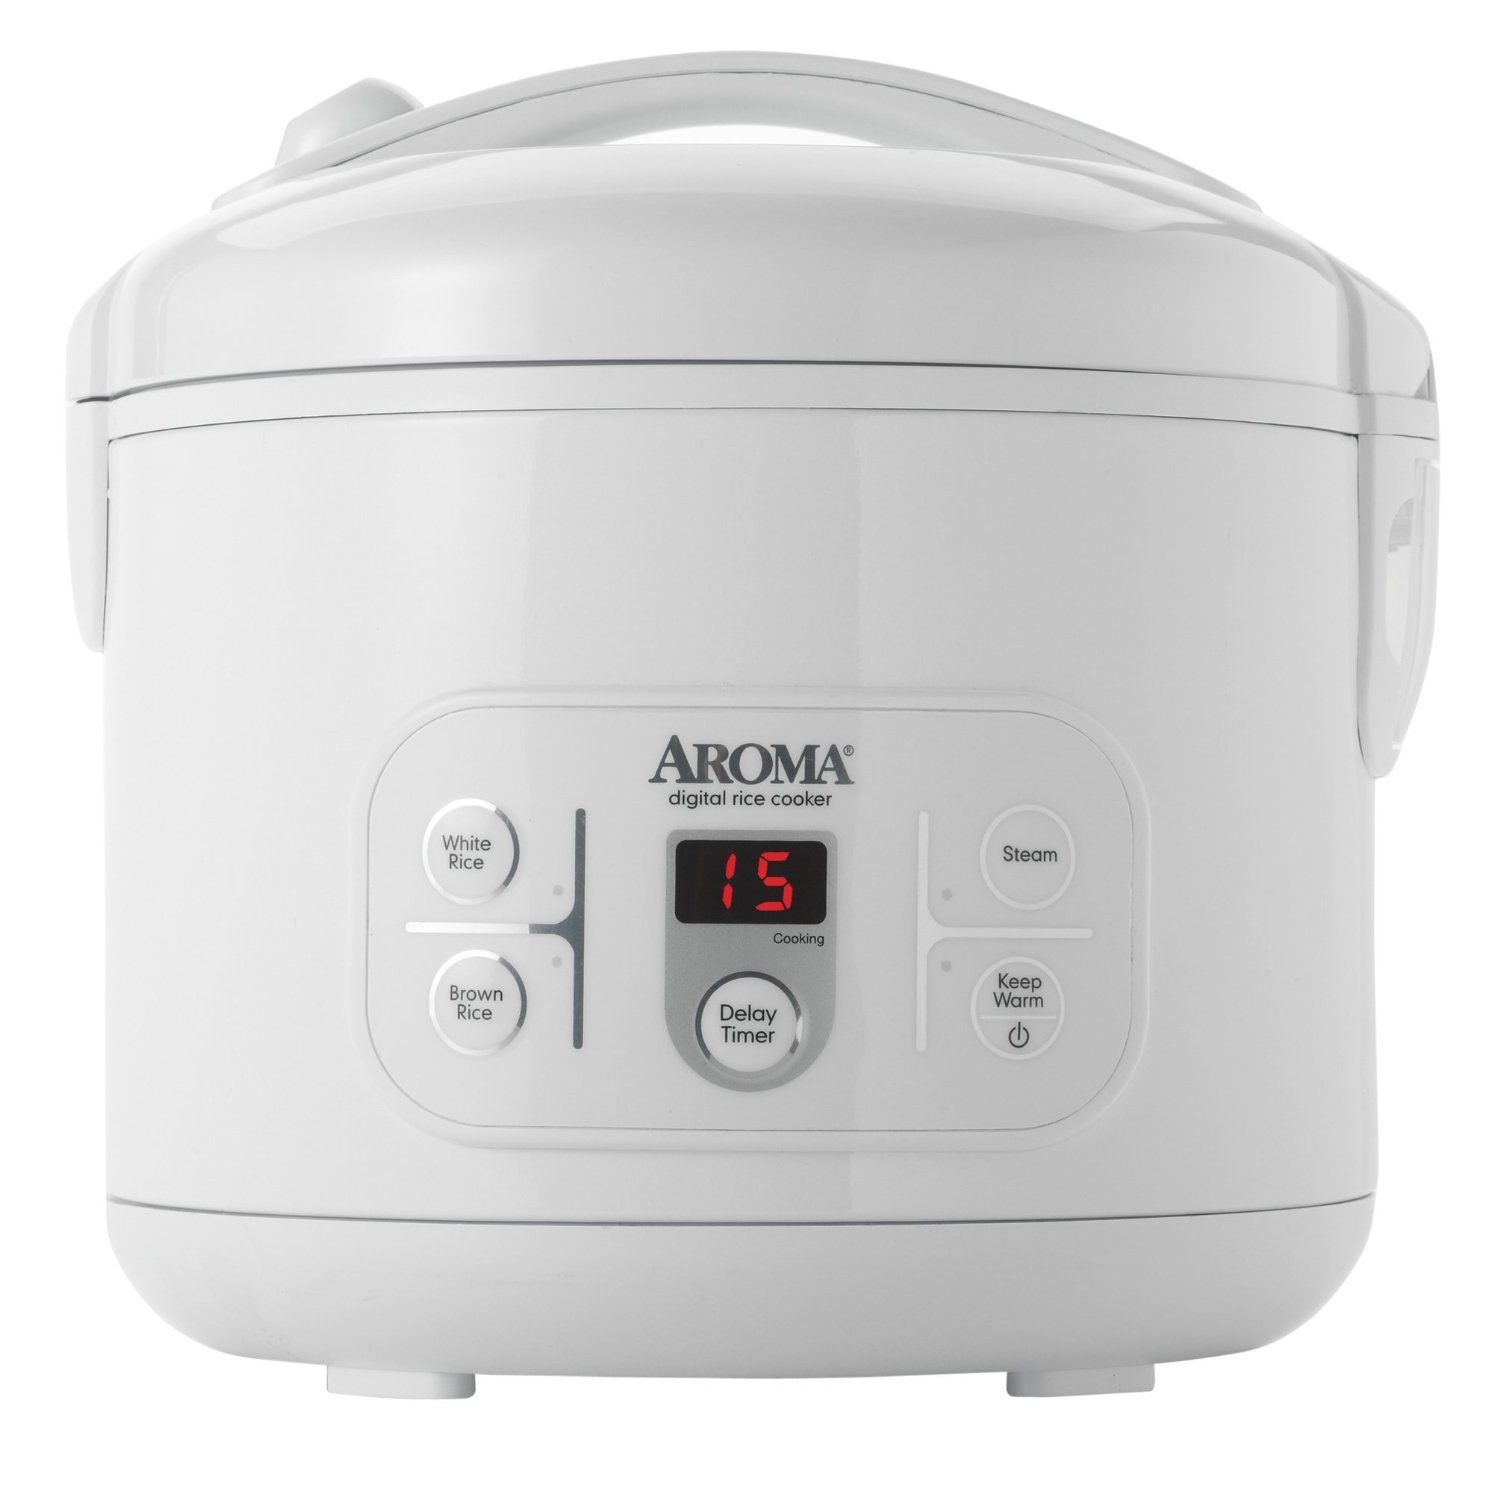 The Best Aroma Rice Cooker